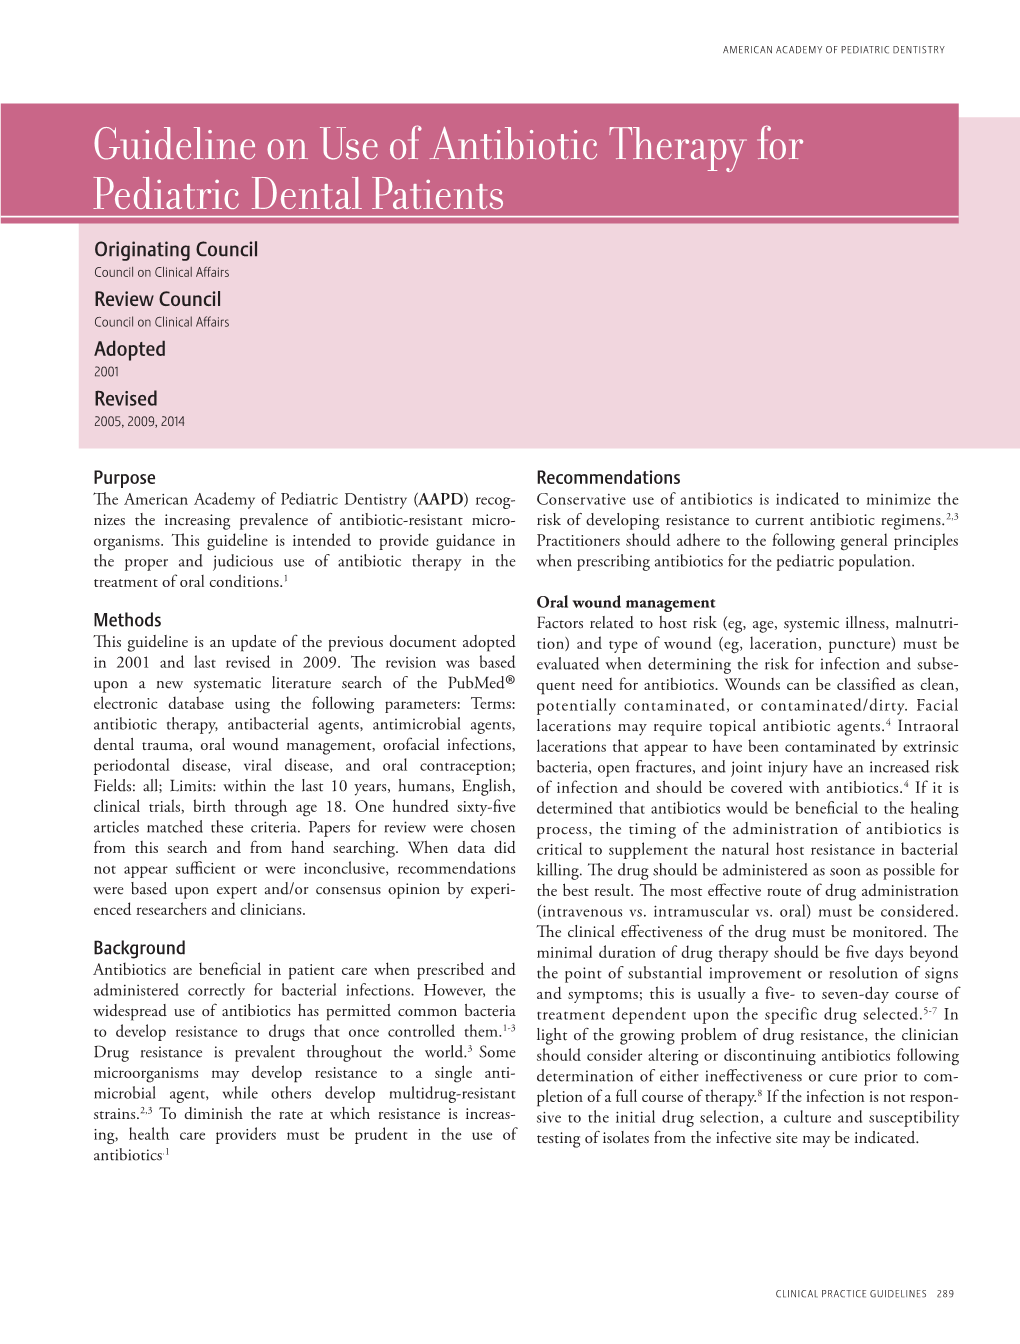 Guideline on Use of Antibiotic Therapy for Pediatric Dental Patients